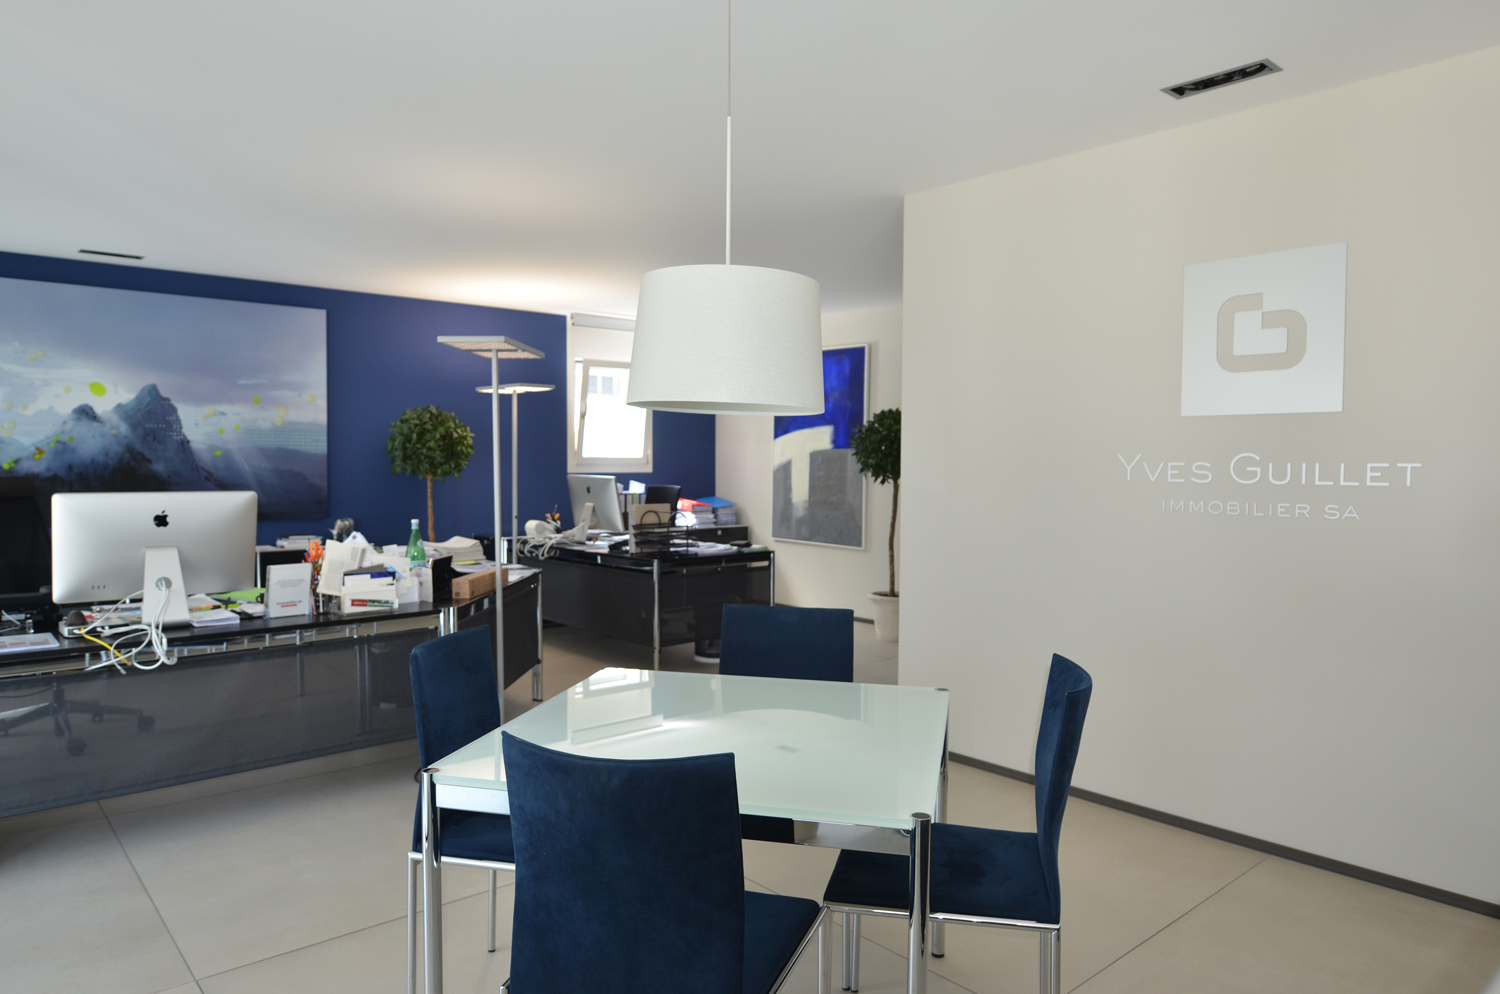 Yves Guillet Immobilier SA